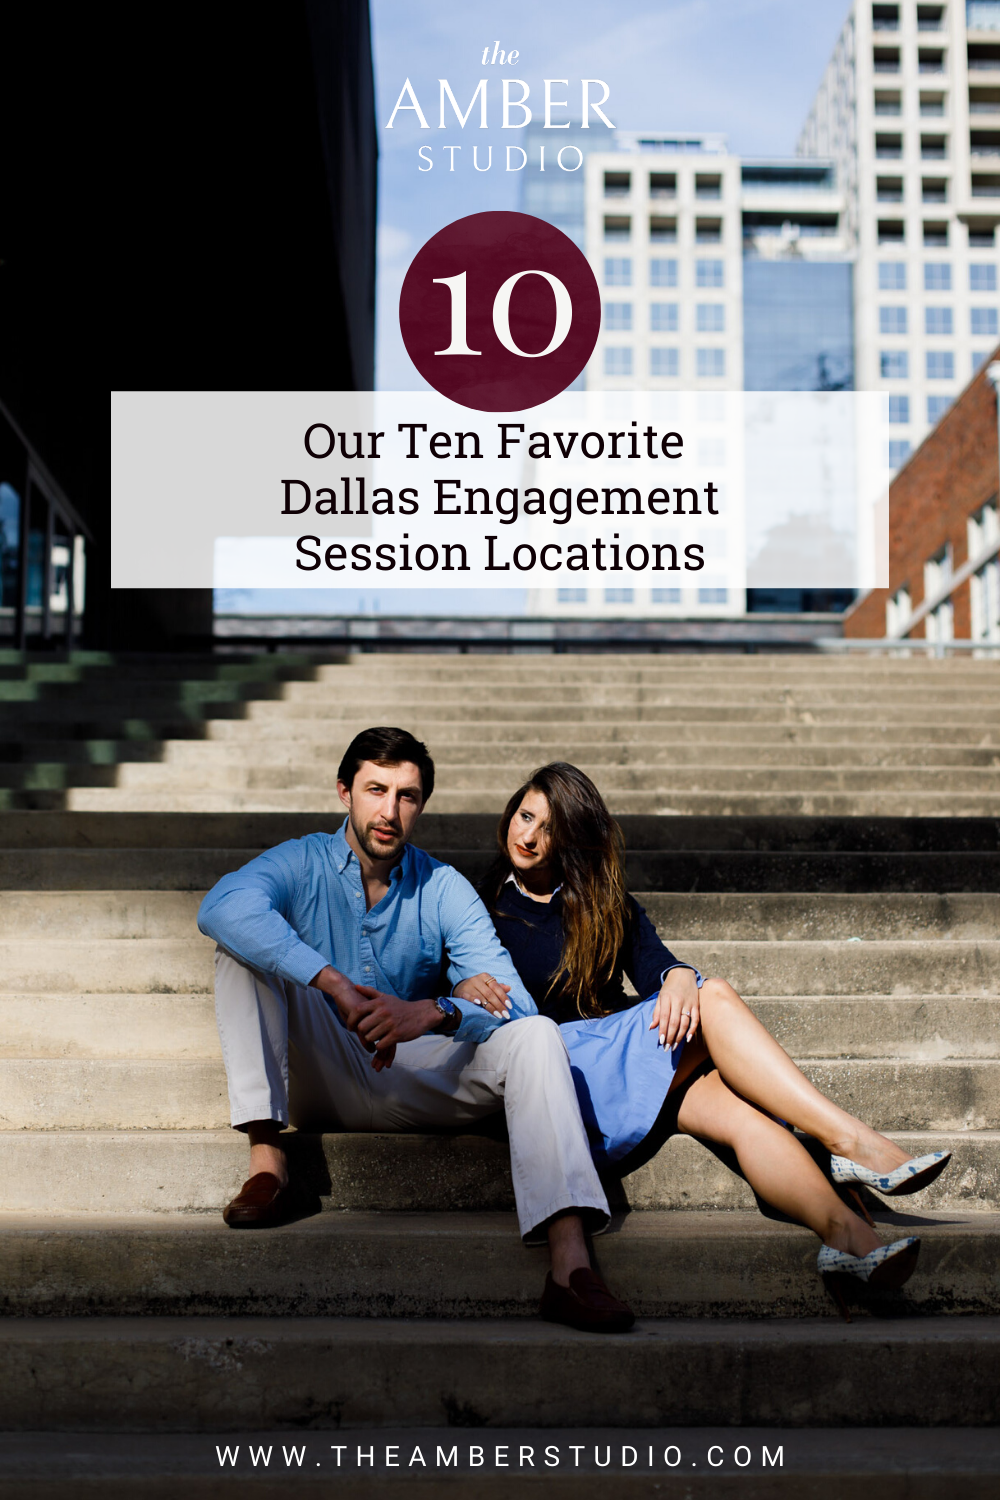 Our 10 Favorite Dallas Engagement Session Locations for Pinterest